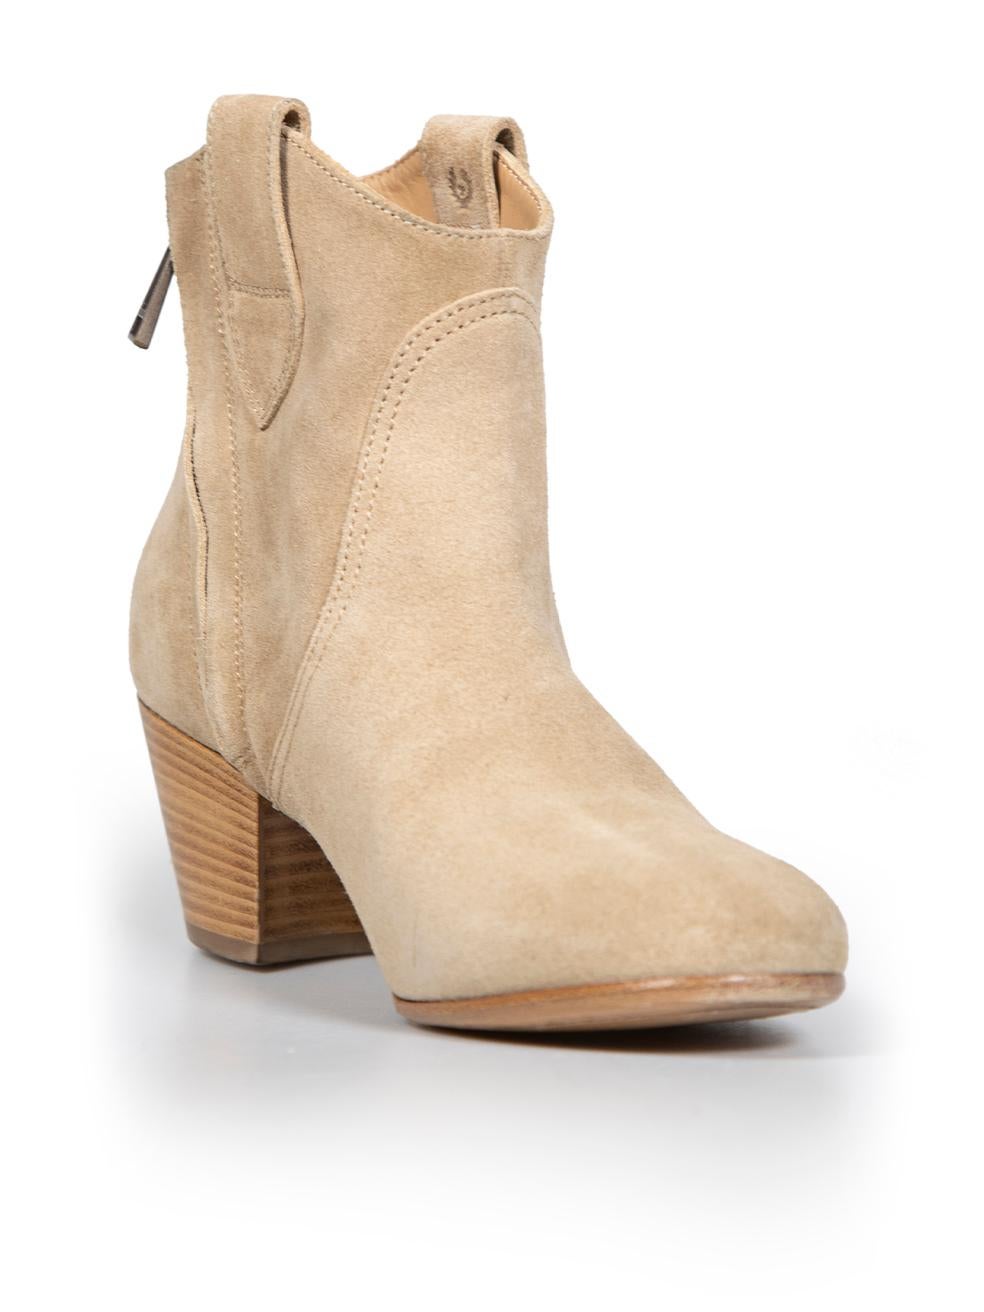 CONDITION is Very good. Minimal wear to boots is evident. Minimal wear to both boot heels and outsoles with indents and abrasions on this used Belstaff designer resale item. These boots com with original box and dust bag.
 
 
 Details
 Beige
 Suede
